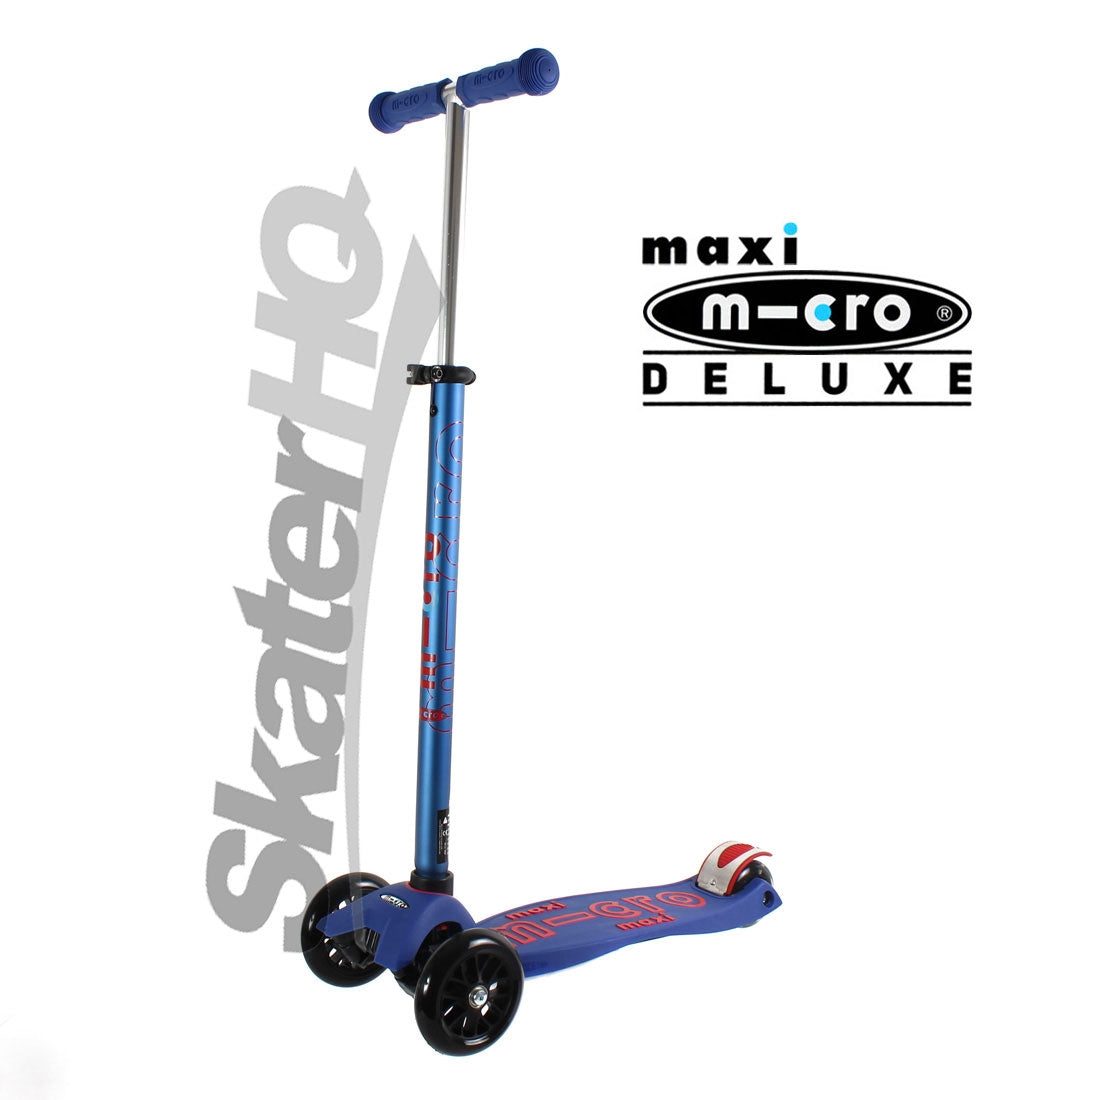 Micro Maxi Deluxe Scooter - Blue Scooter Completes Rec